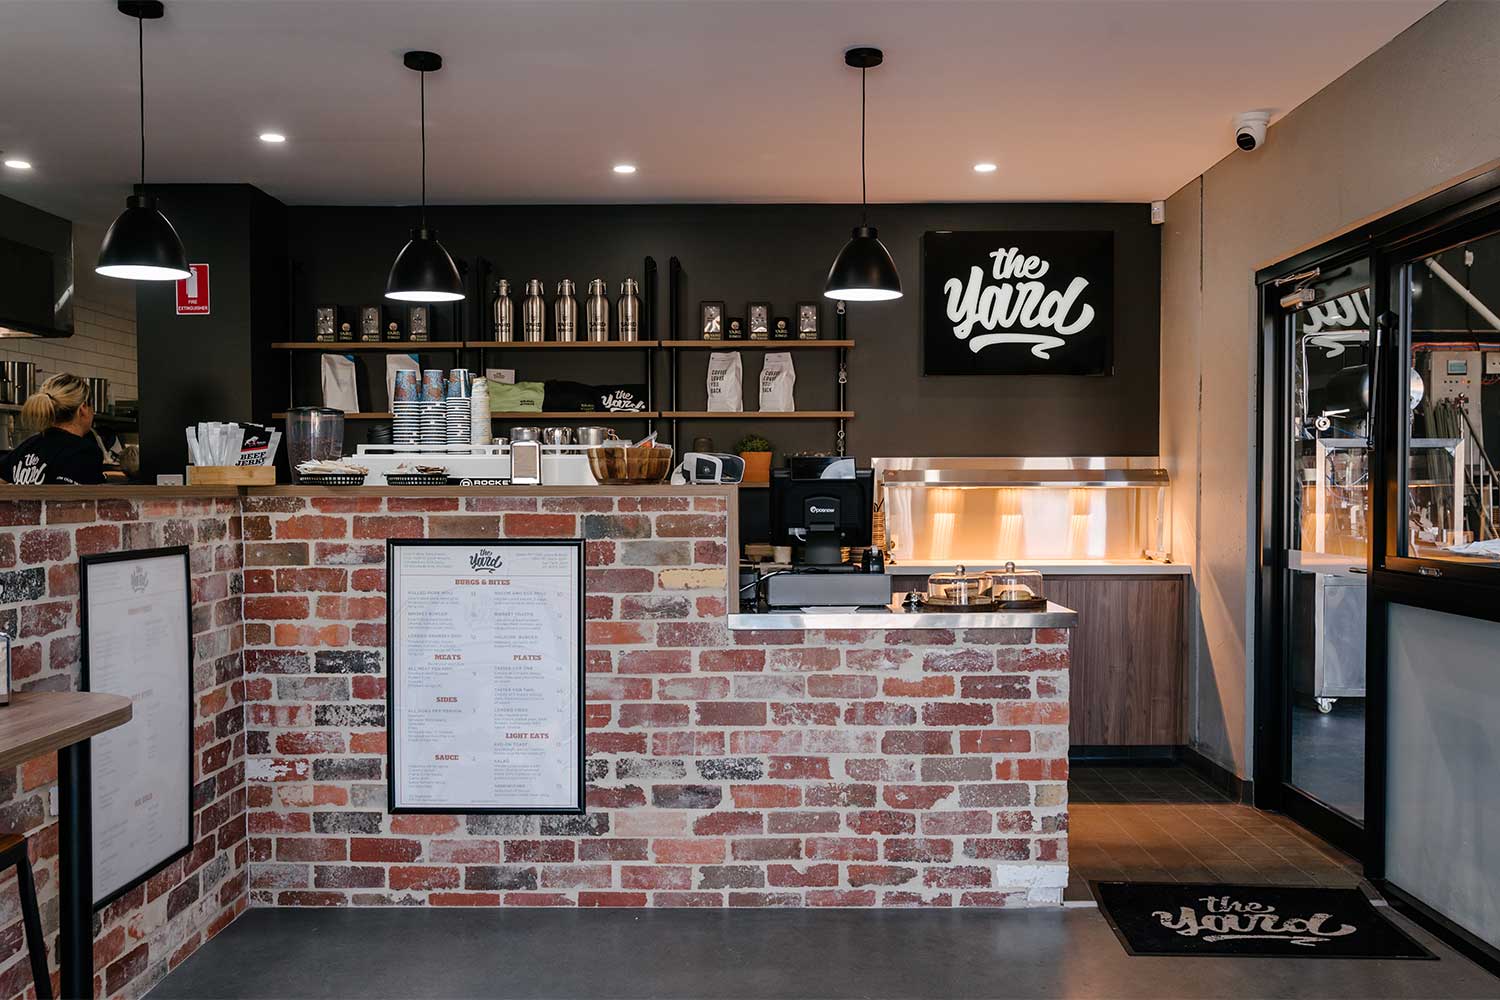 Serving counter and coffee machine at The Yard cafe